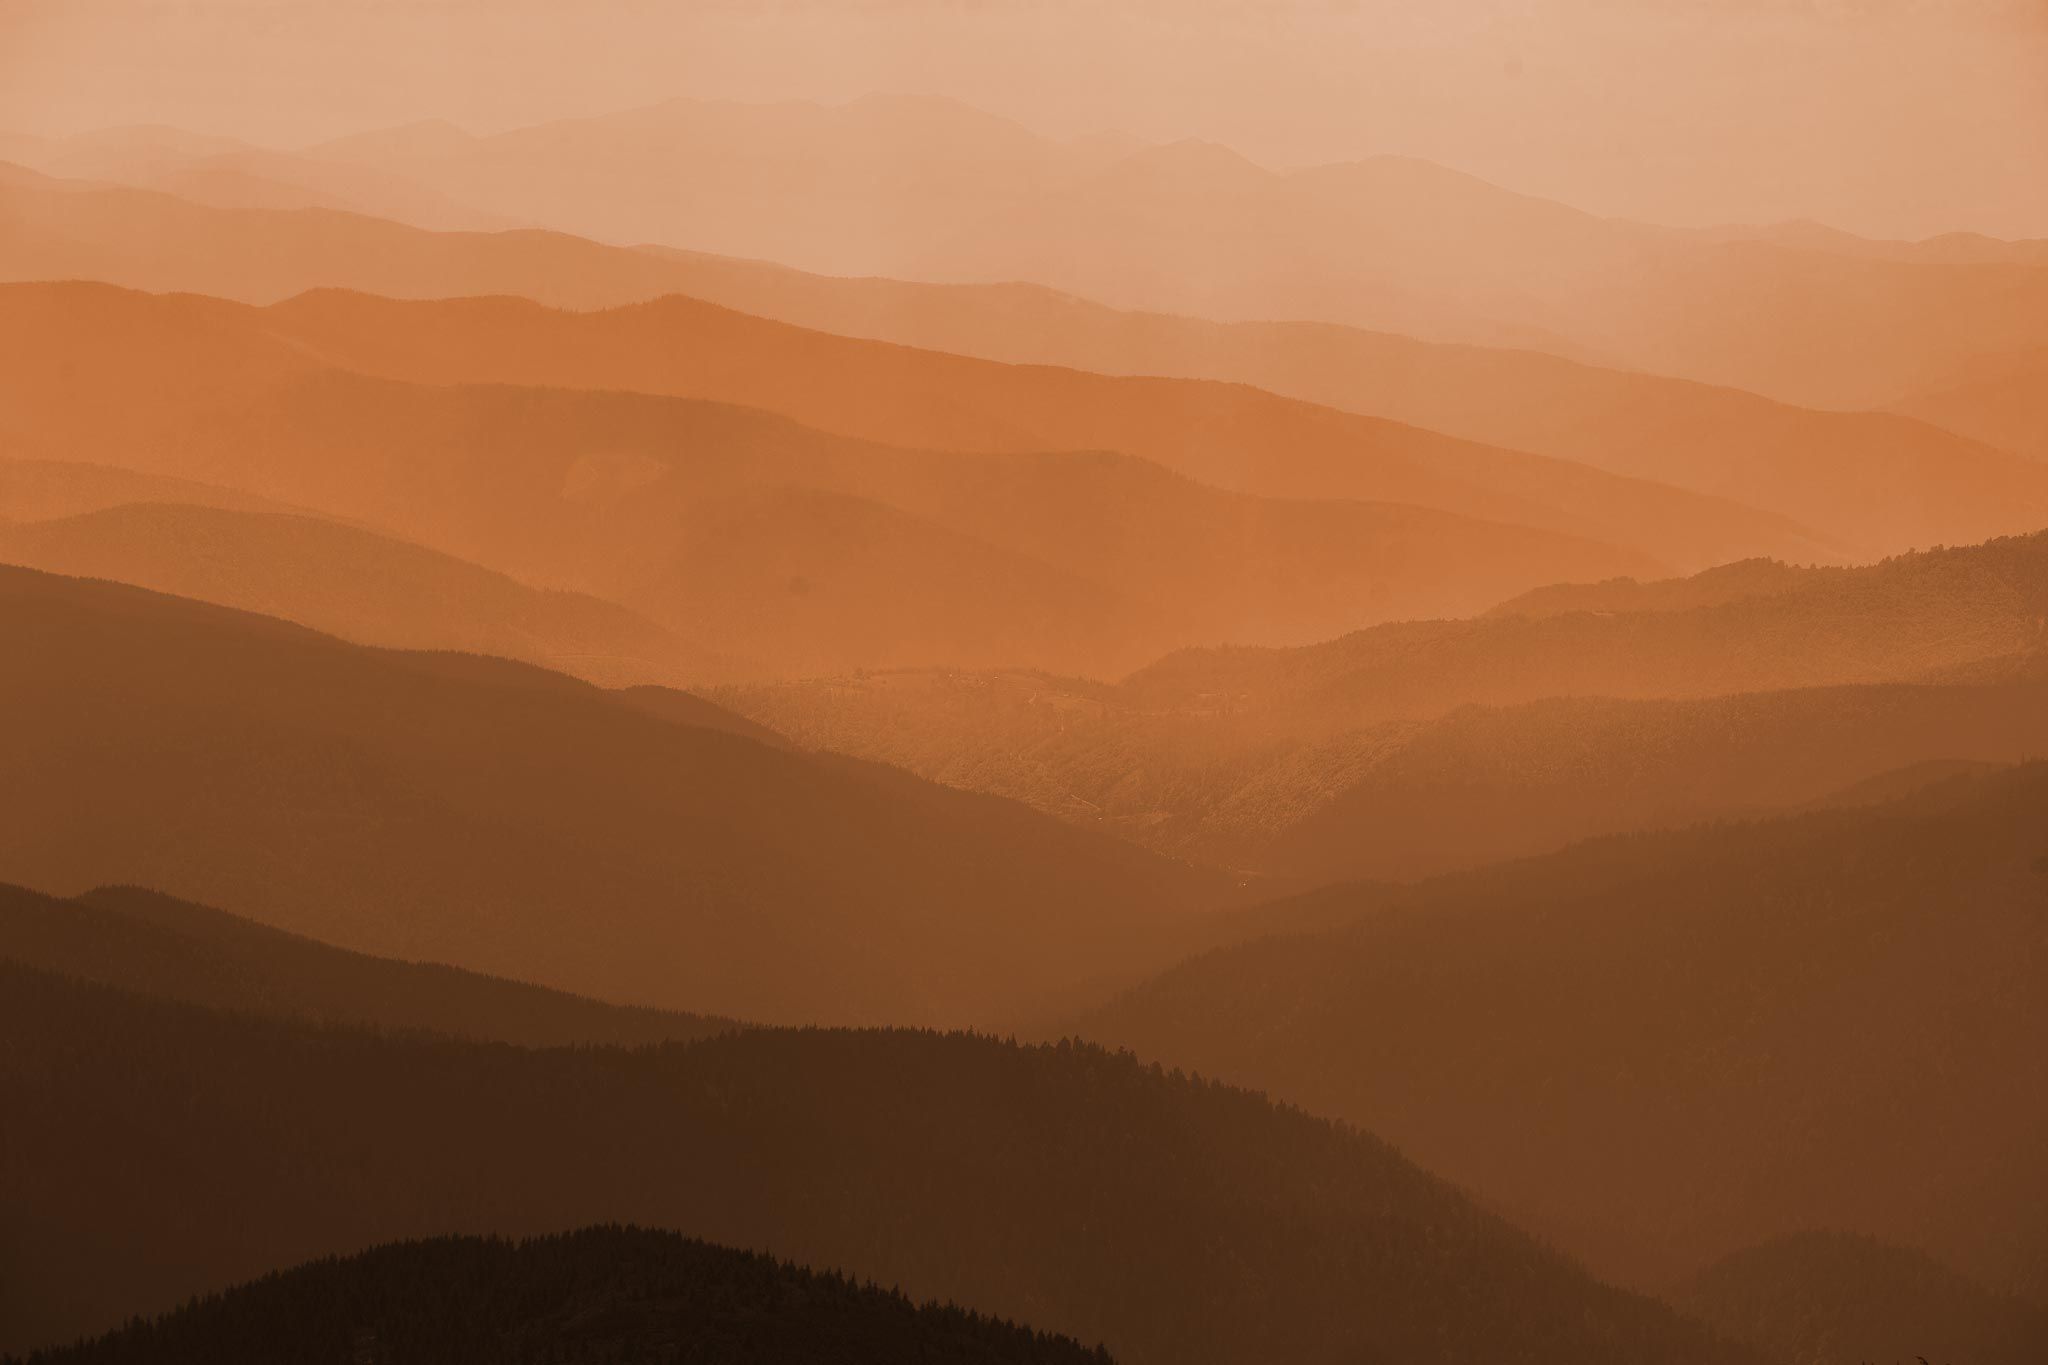 Rolling mountains that fade into the distance in a hazy shot that looks like there is smoke from a fire